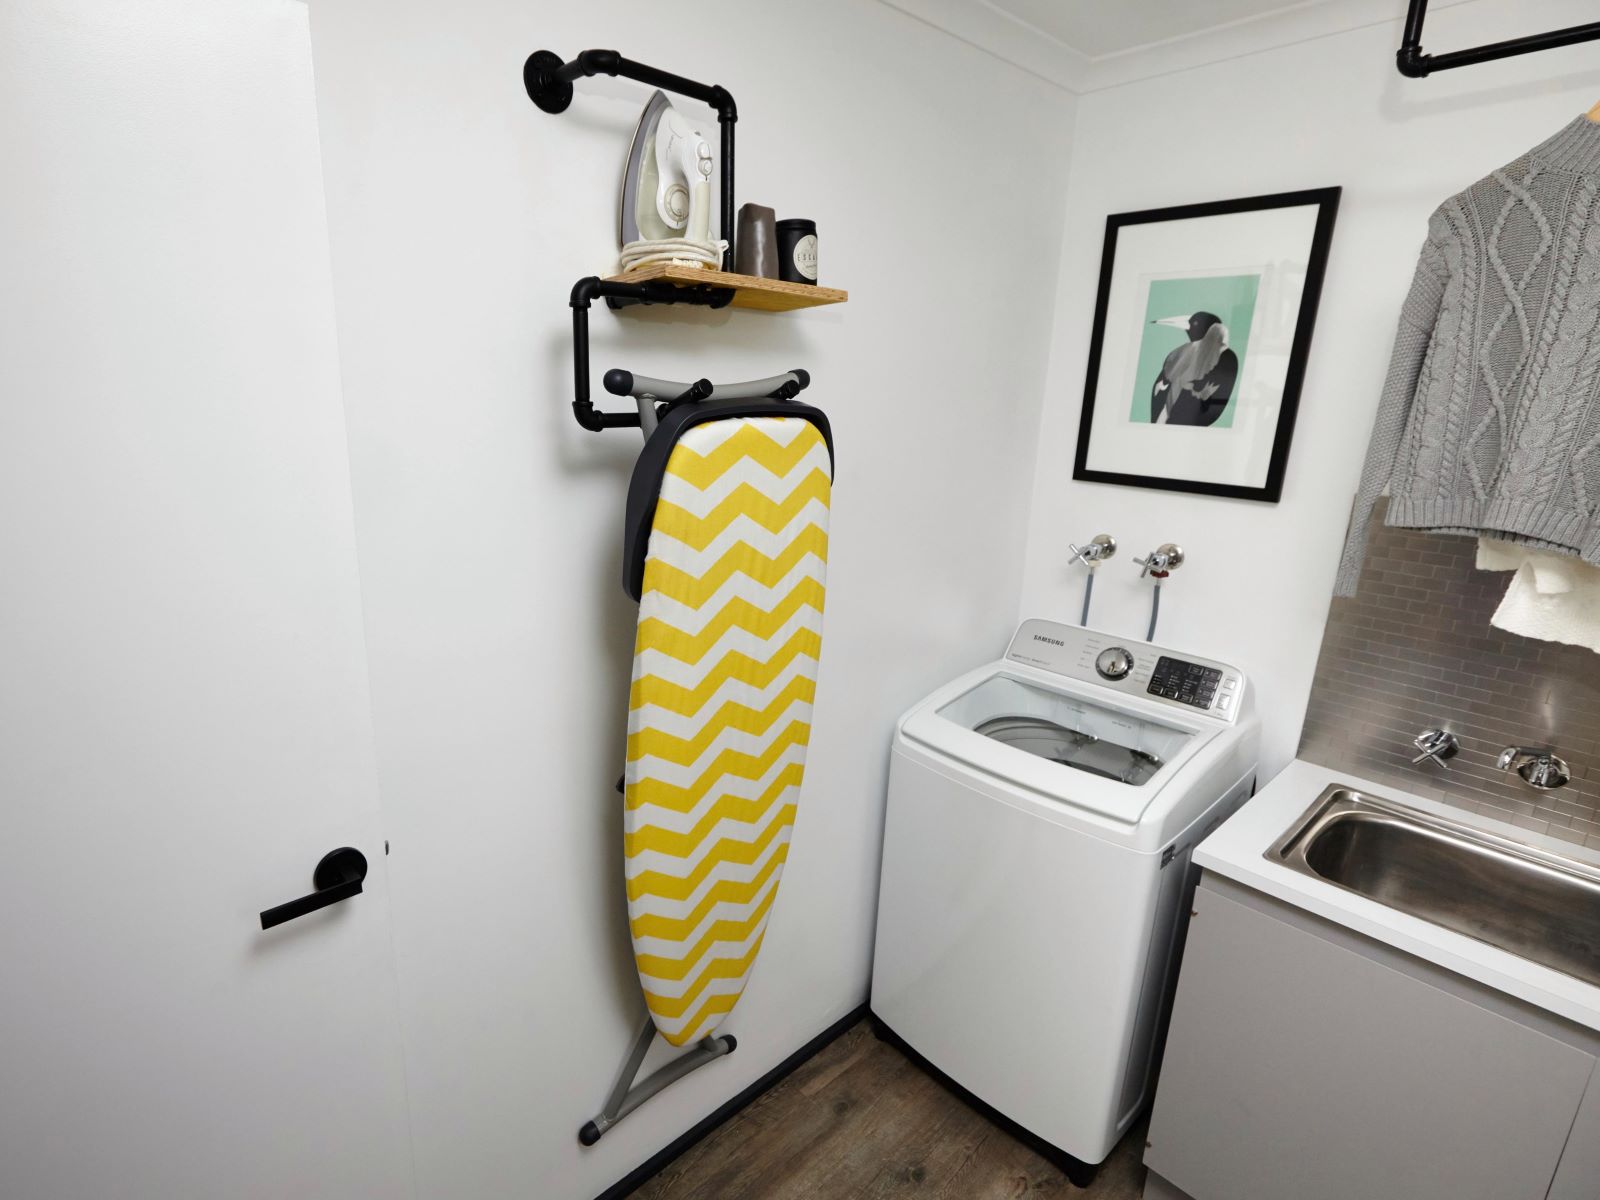 How To Hang An Ironing Board On The Wall